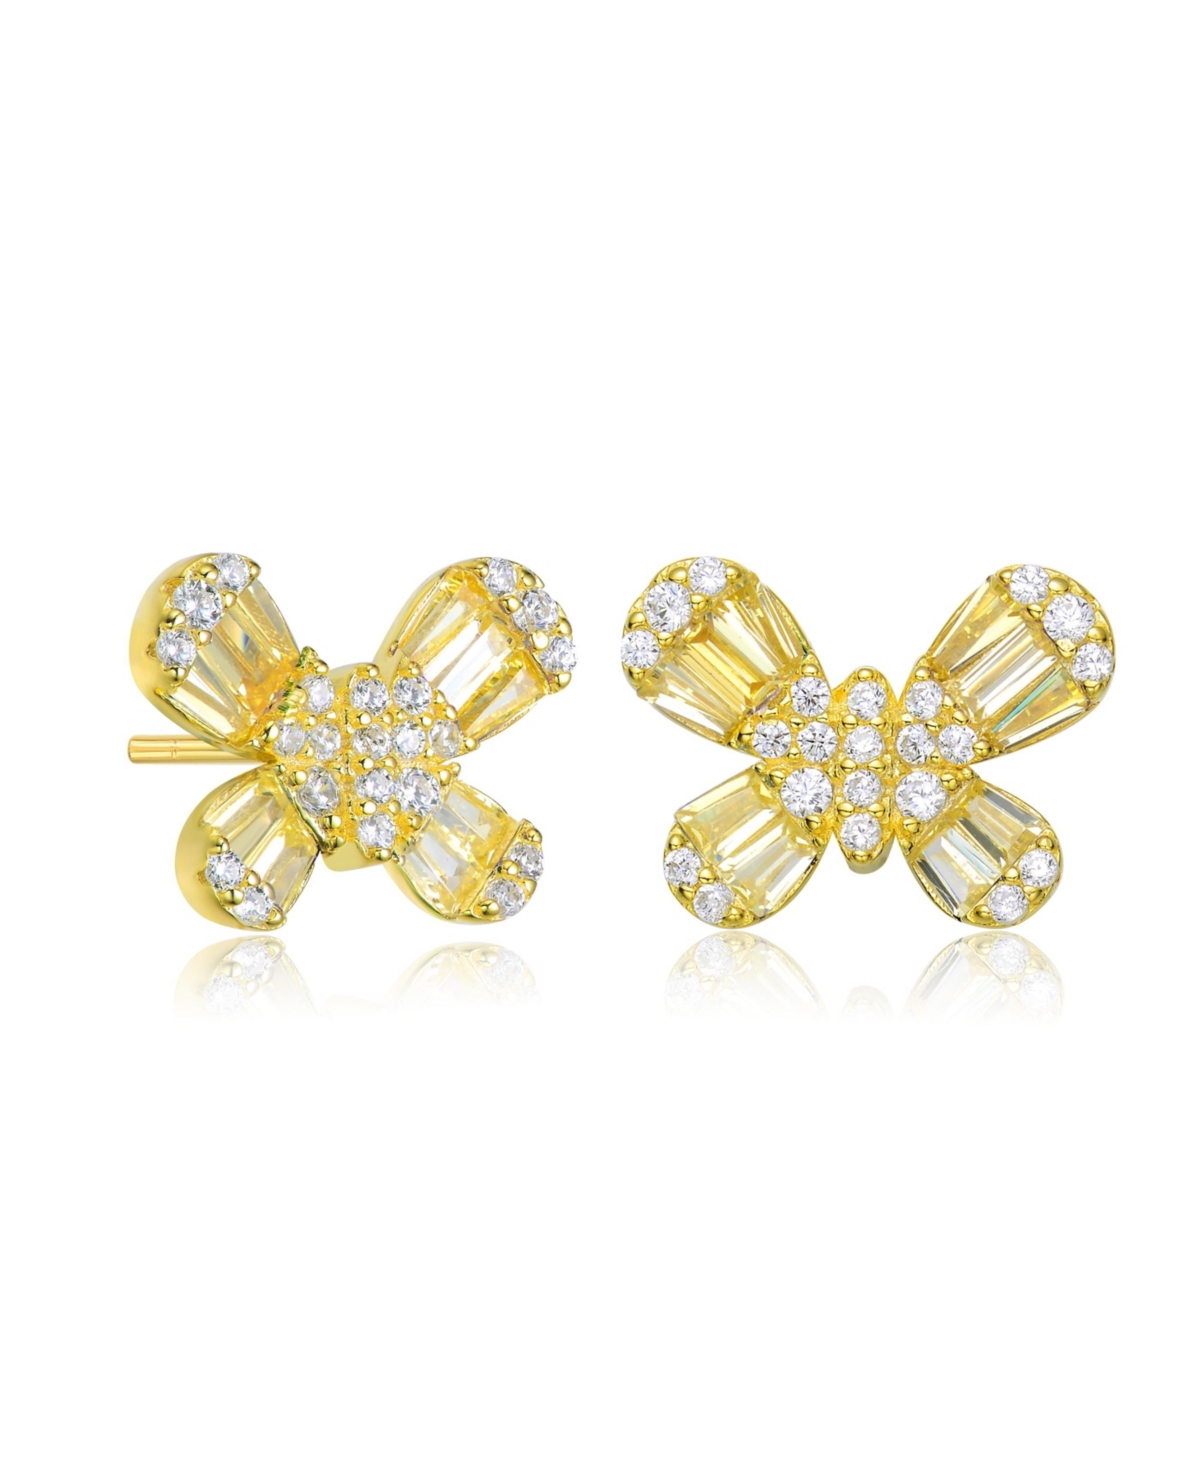 Gigi Girl Teens/Young Adults Sterling Silver with Baguette and Clear Round Cubic Zirconia Butterfly Stud Earrings - Yellow